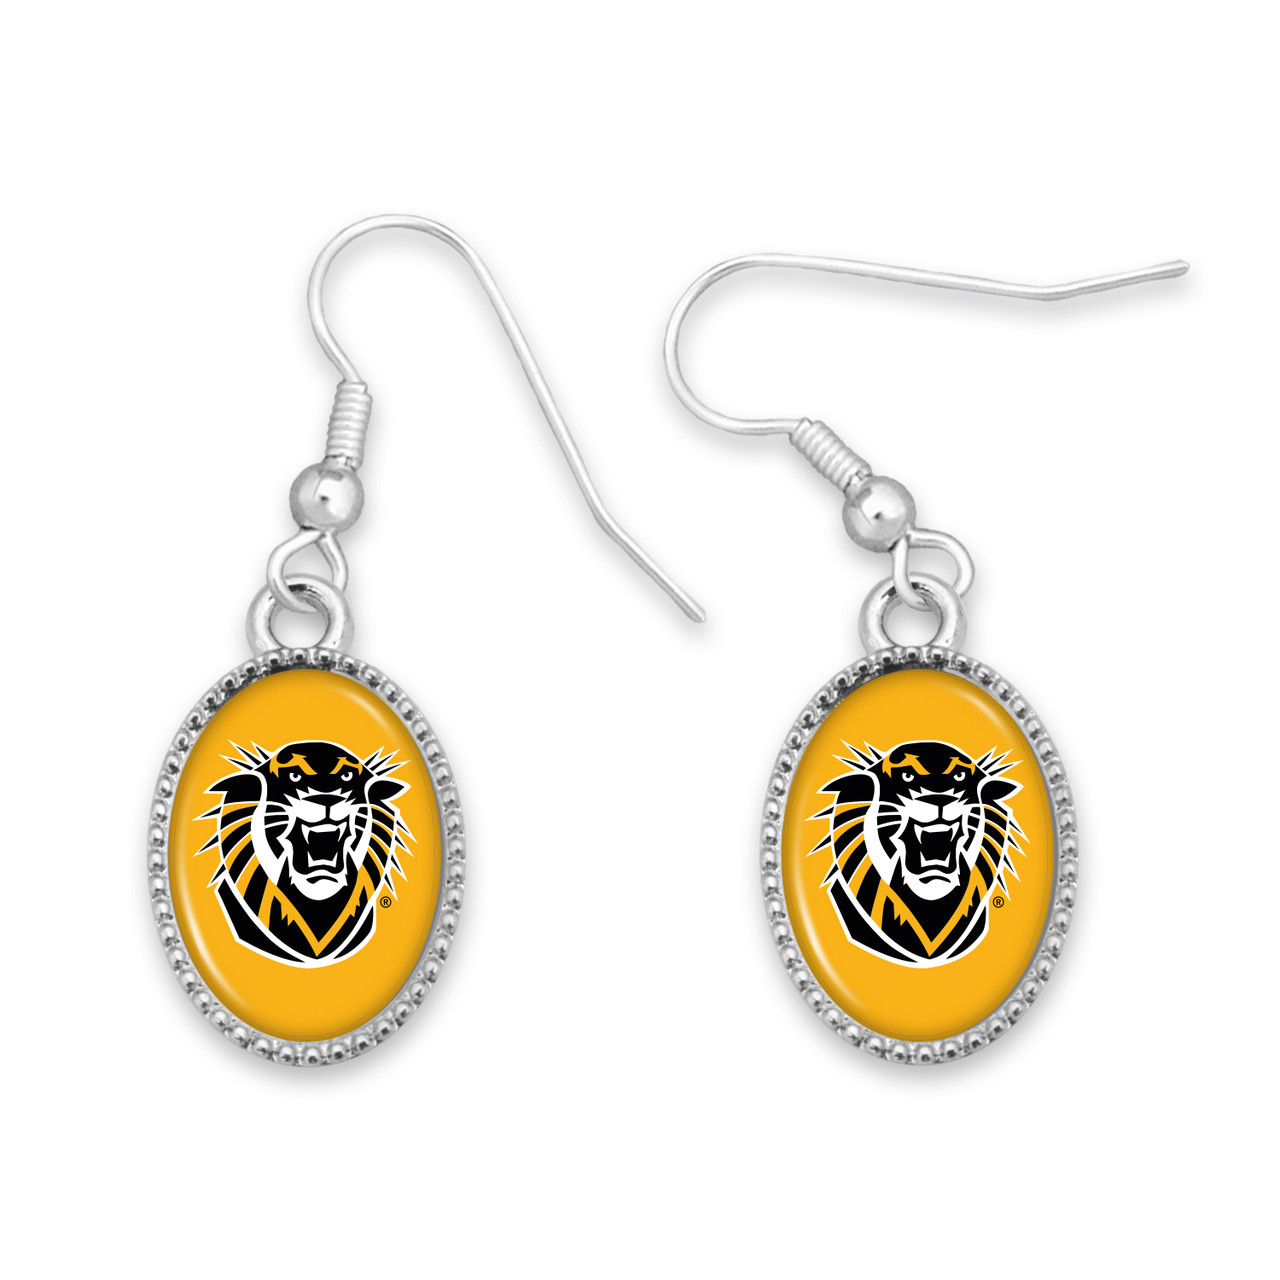 Fort Hays State Tigers Earrings- Kennedy